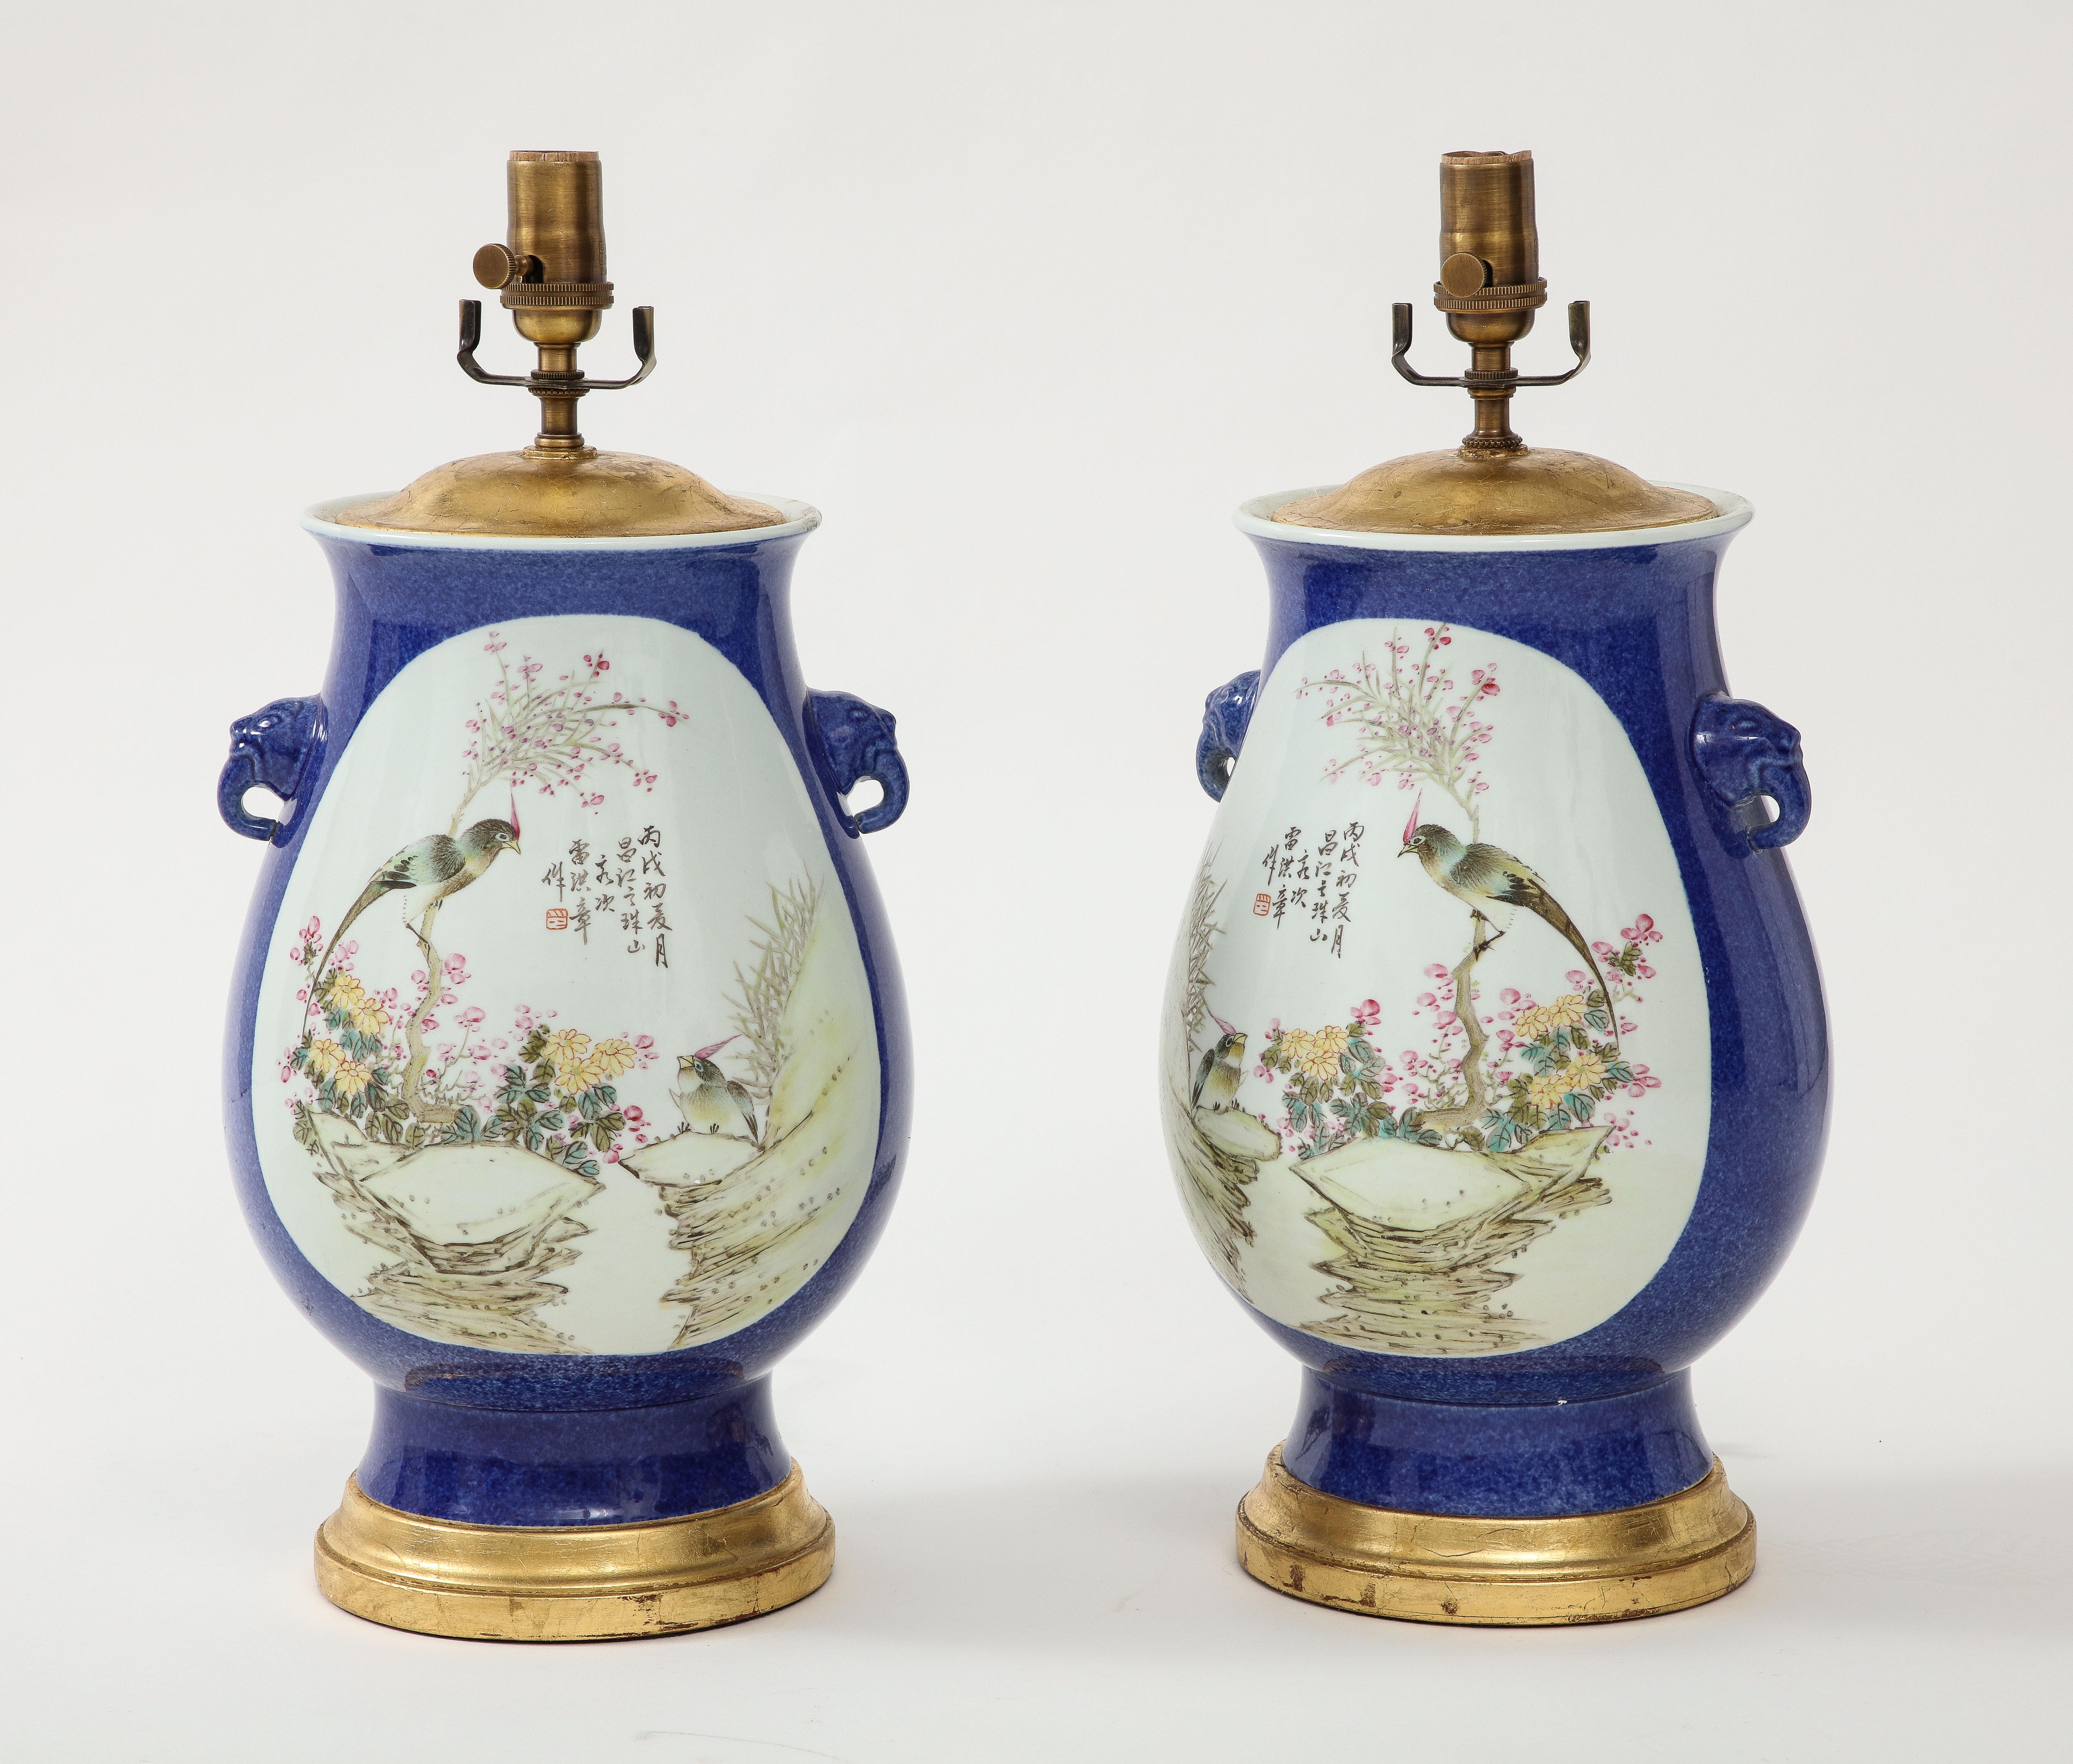 Pair of Chinese Porcelain Lamps 20